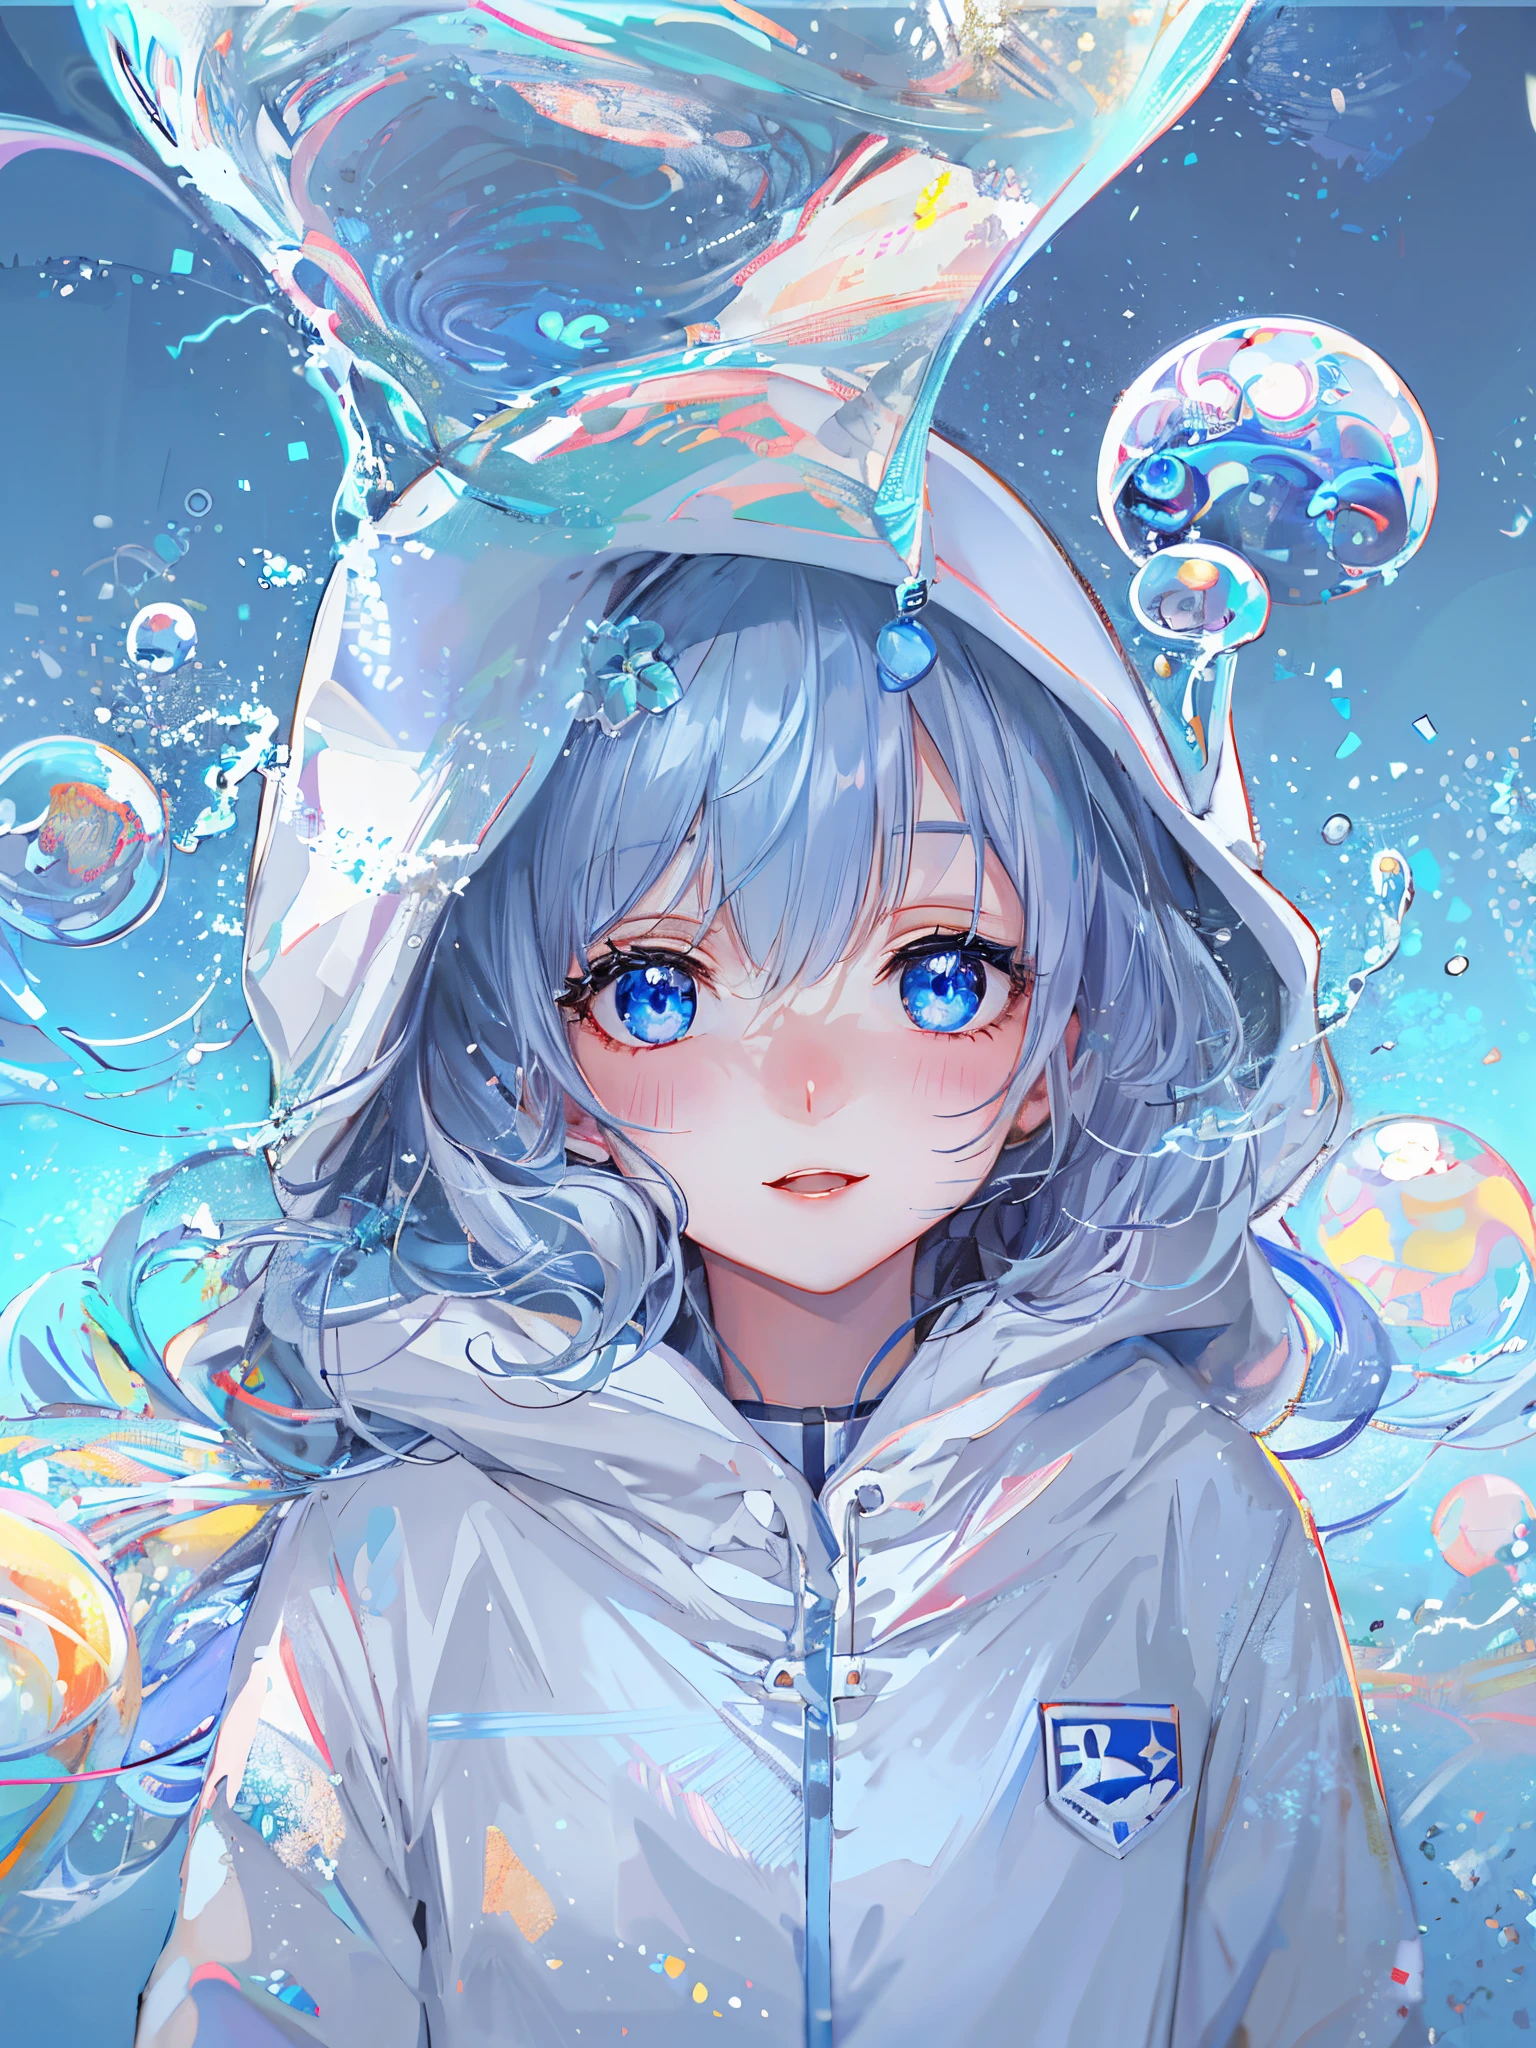 ((top-quality)), ((​masterpiece)), ((ultra-detailliert)), (Extremely delicate and beautiful), girl with, report, cold attitude,((White hoodie)),She is very(relax)with  the(Settled down)Looks,depth of fields,Evil smile,Bubble, under the water, Air bubble,Underwater world bright light blue eyes,inner color with bright gray hair and light blue tips,,,,,,,,,,,,,,,,,,,,Cold background,Bob Hair - Linear Art, shortpants、knee high socks、White uniform like 、Light blue ribbon ties、Clothes are sheer、The hand in my right pocket is like a sapphire,Fronllesse Blue, A small blue light was floating、fantastic eyes、selfy,Self-shot